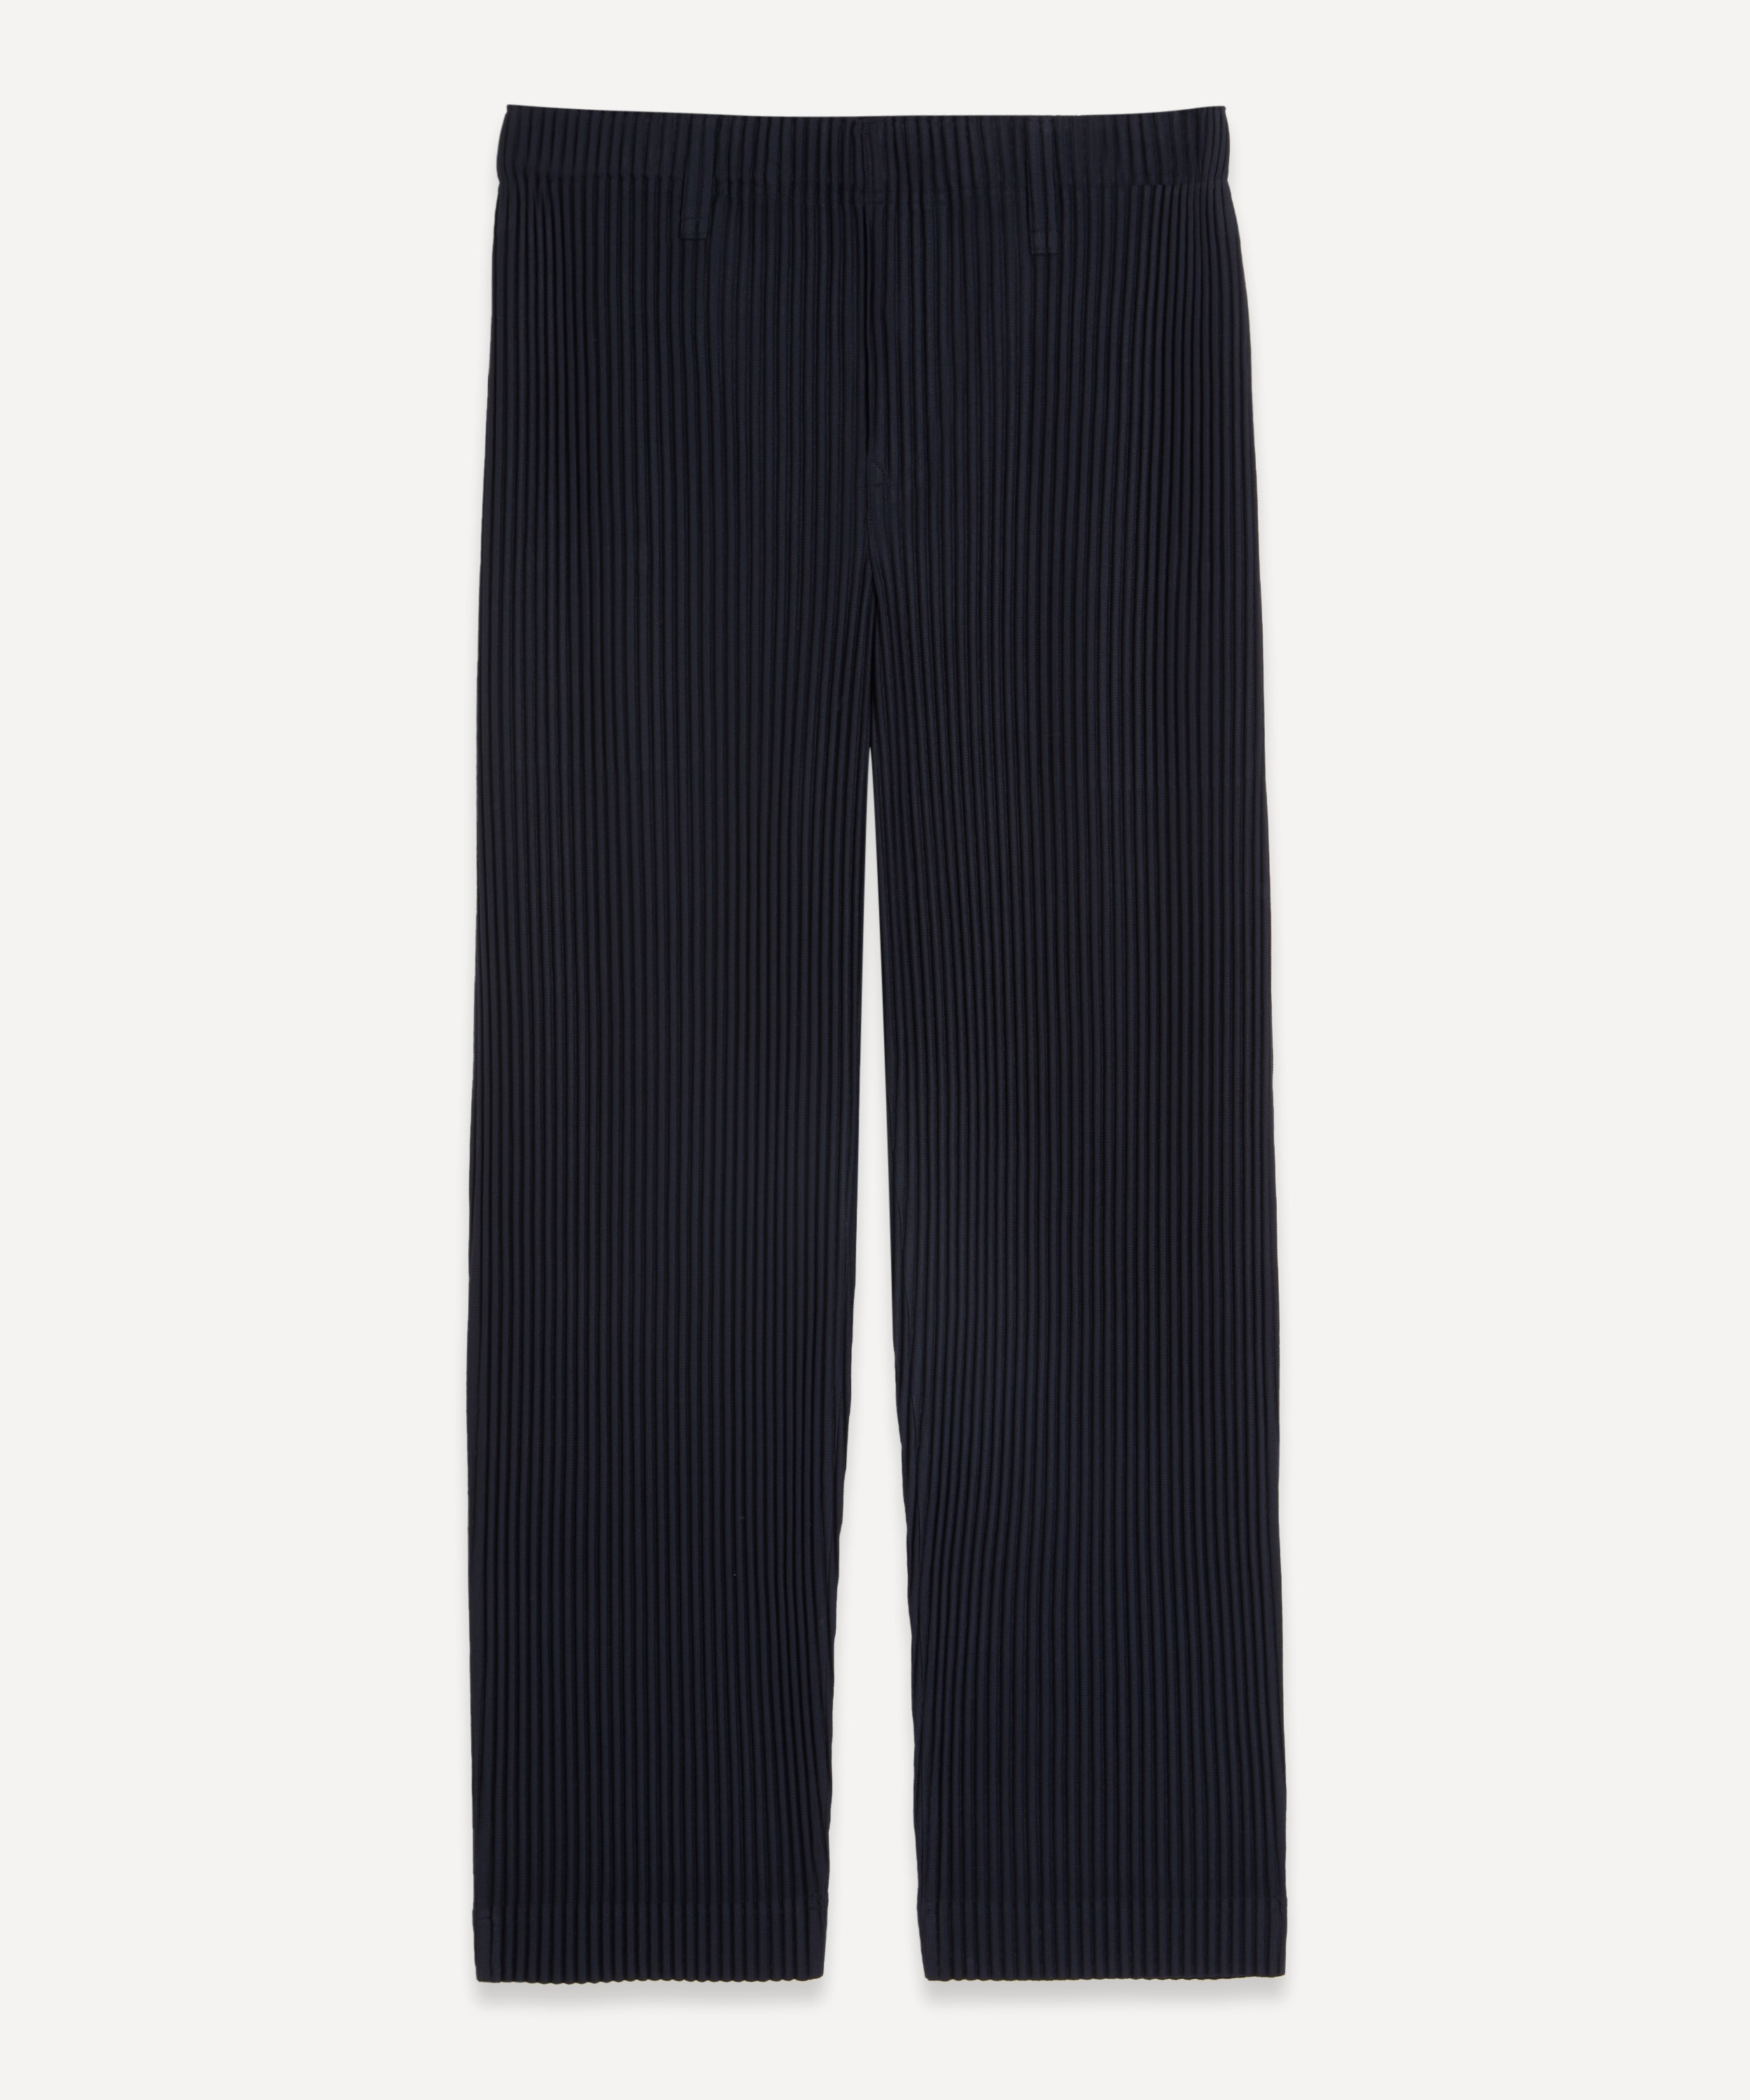 Homme Plisse Issey Miyake - Pleated Straight Leg Trousers